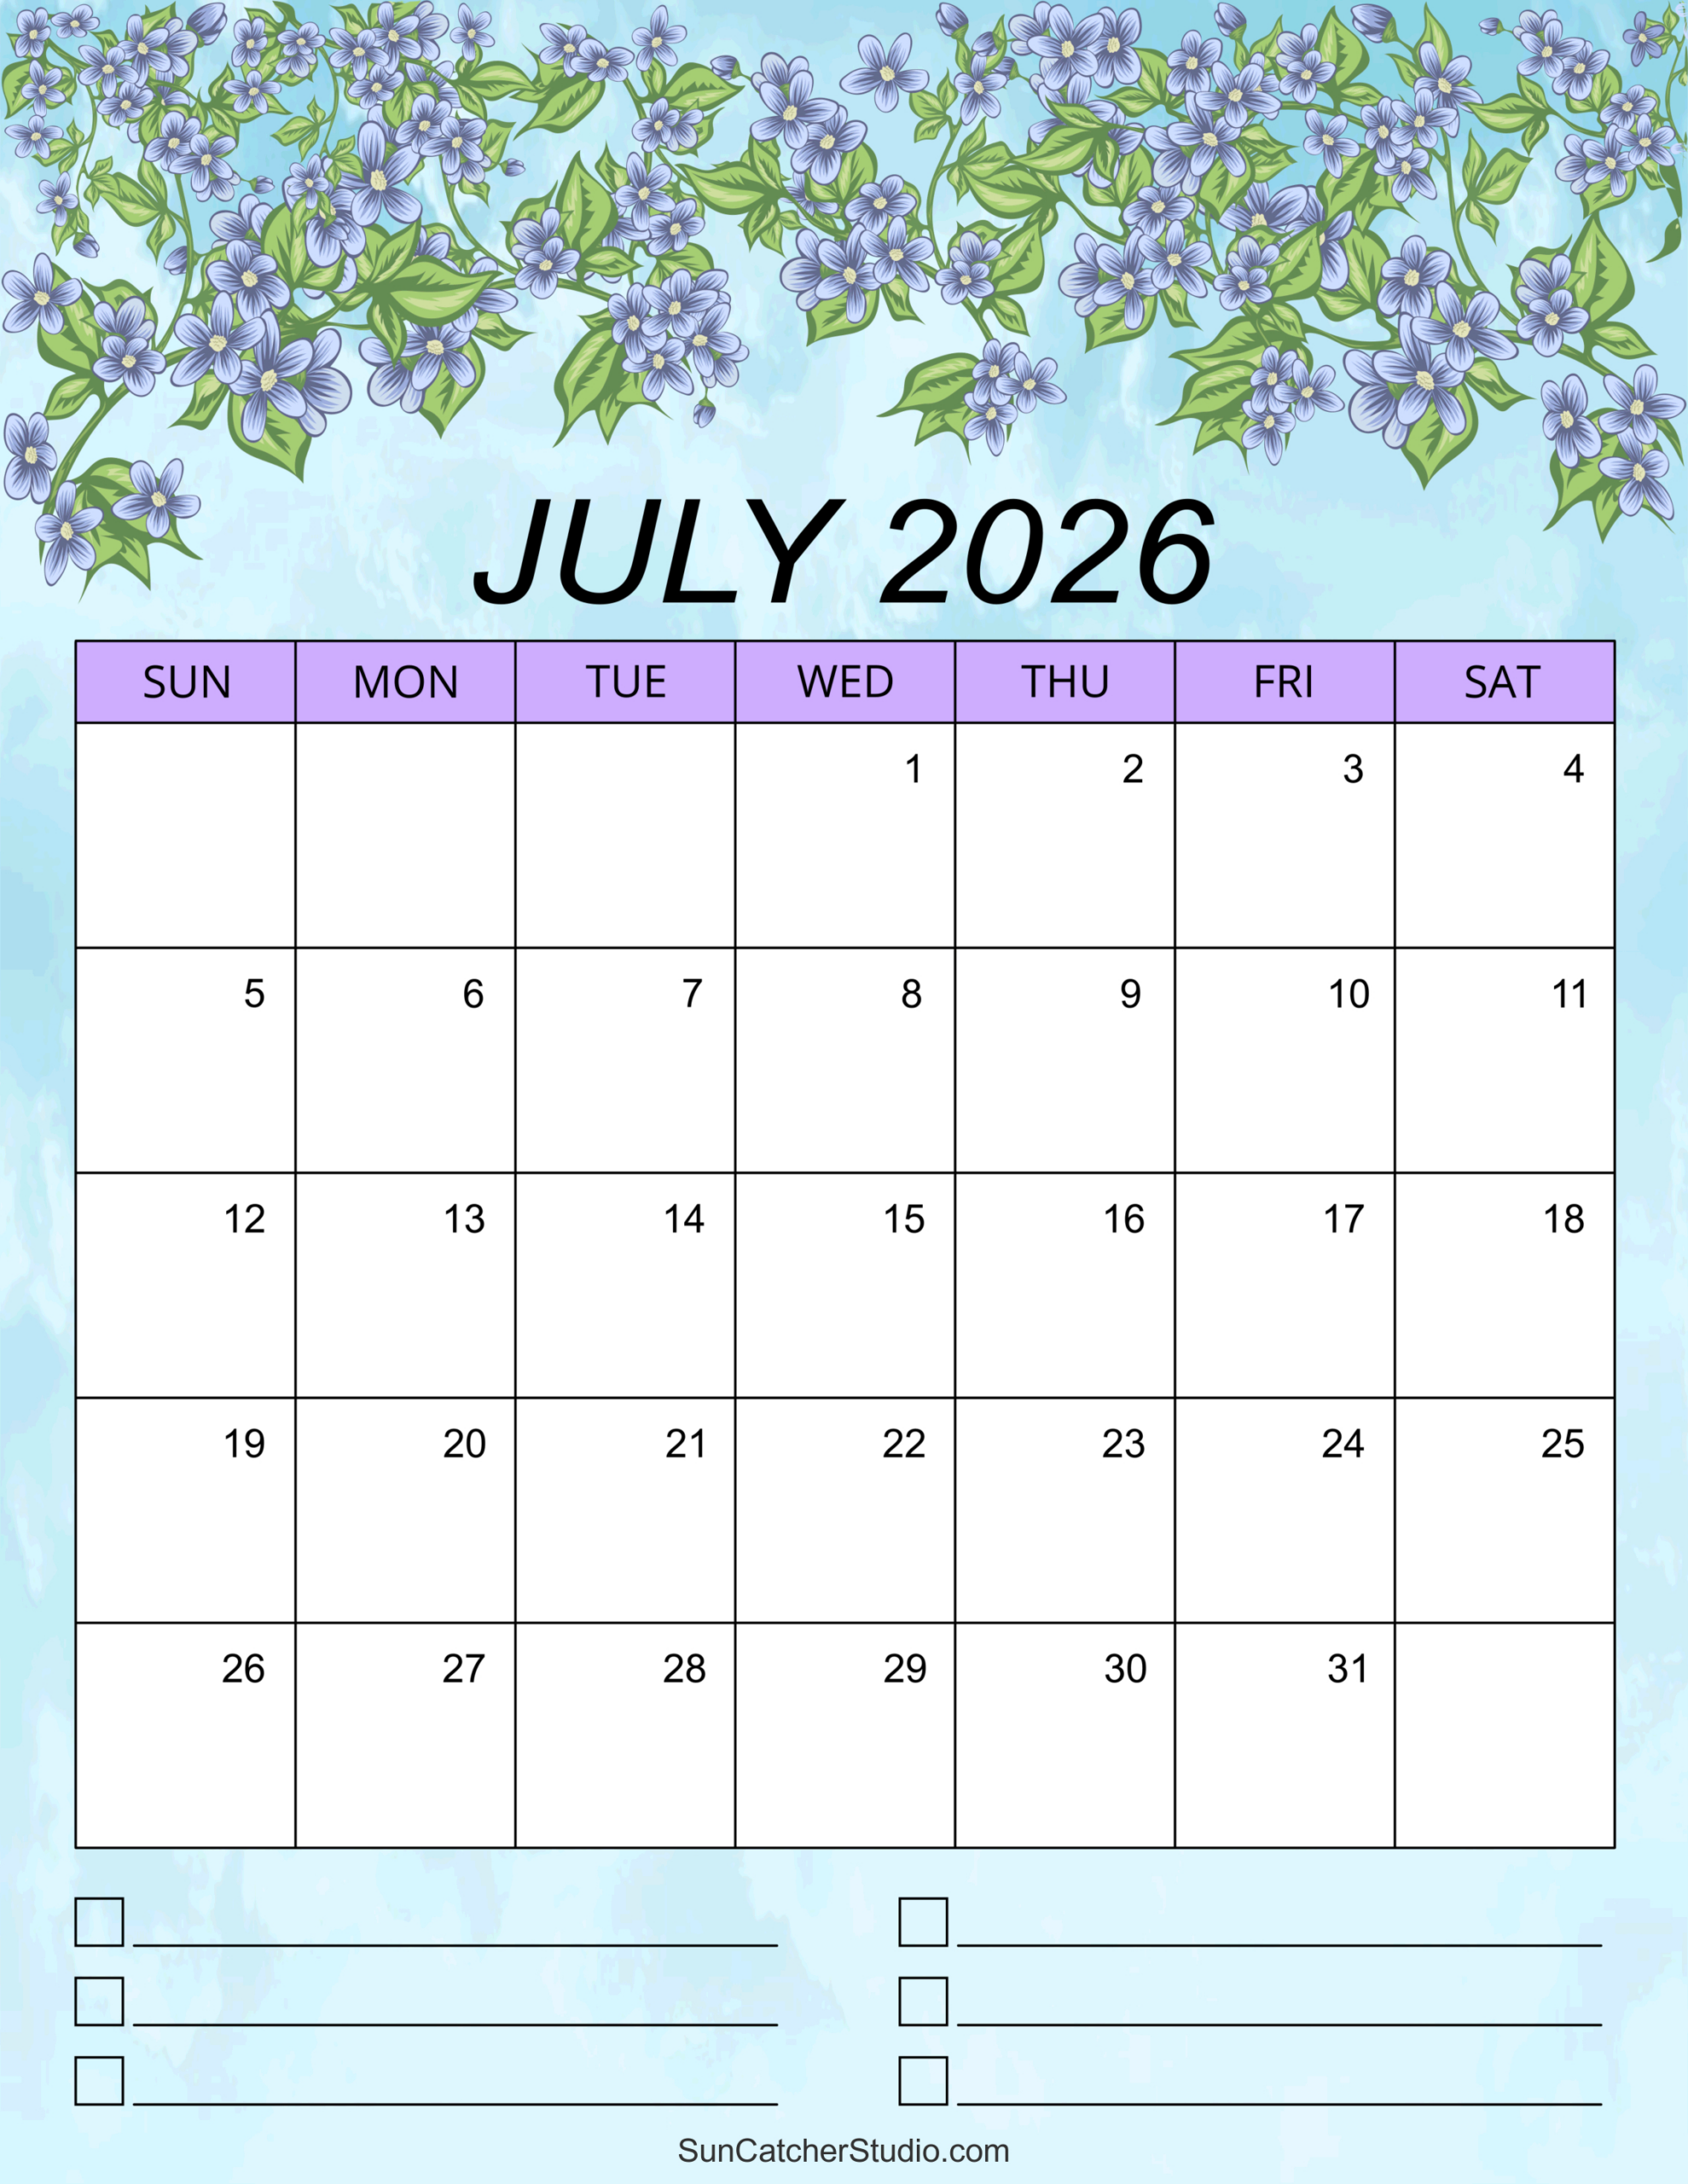 July 2026 Calendar (Free Printable) – Diy Projects, Patterns within Calendar For July 2026